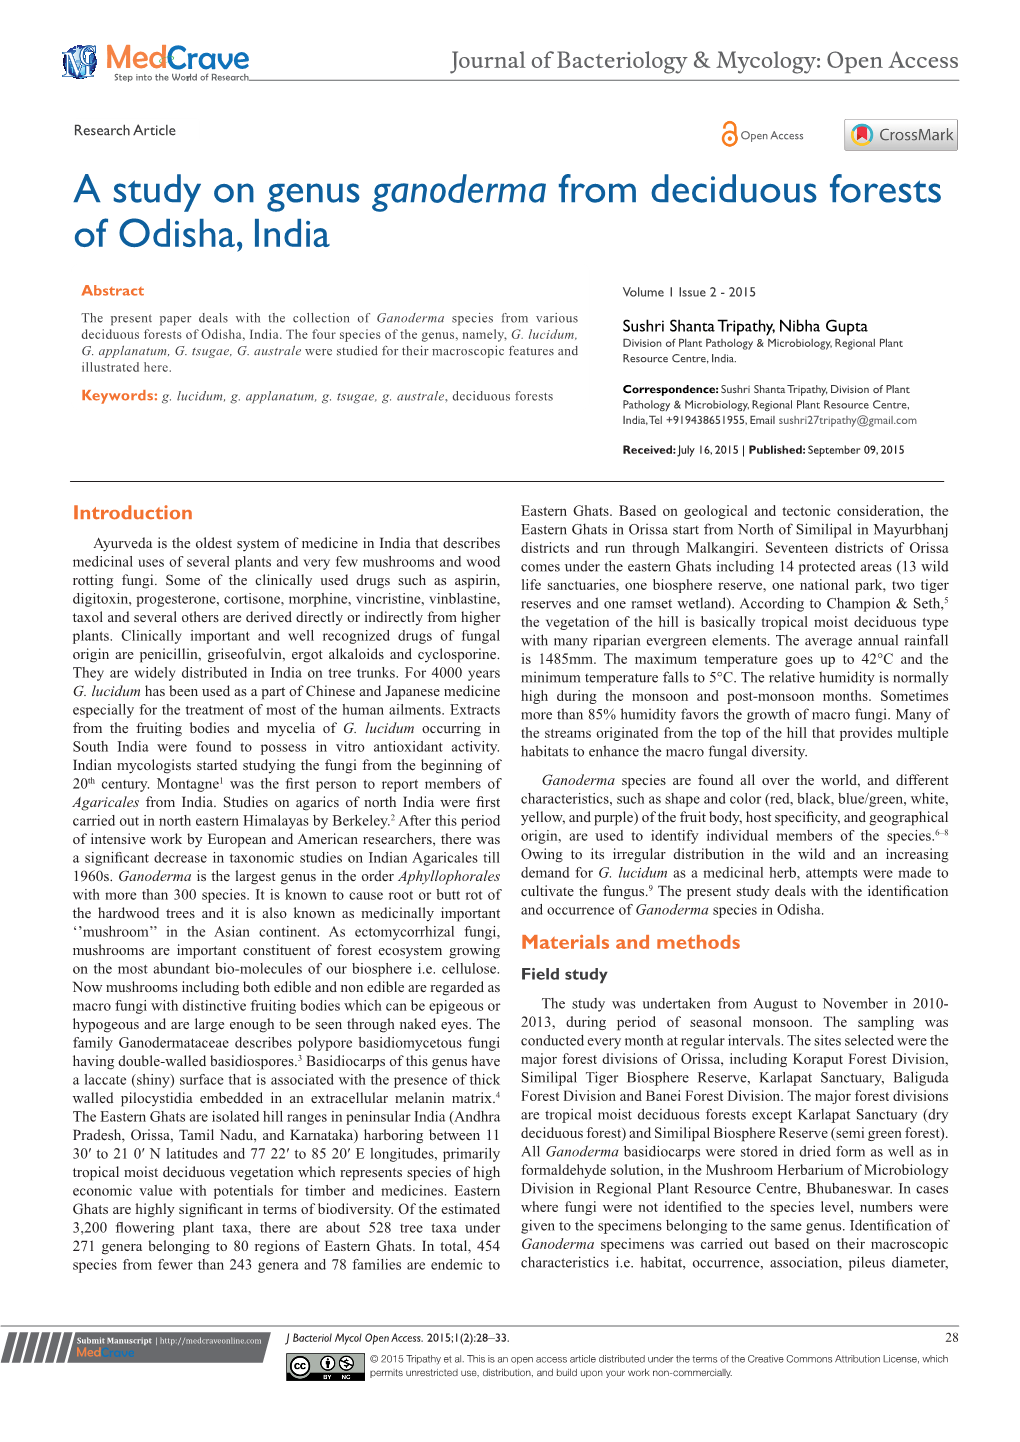 A Study on Genus Ganoderma from Deciduous Forests of Odisha, India